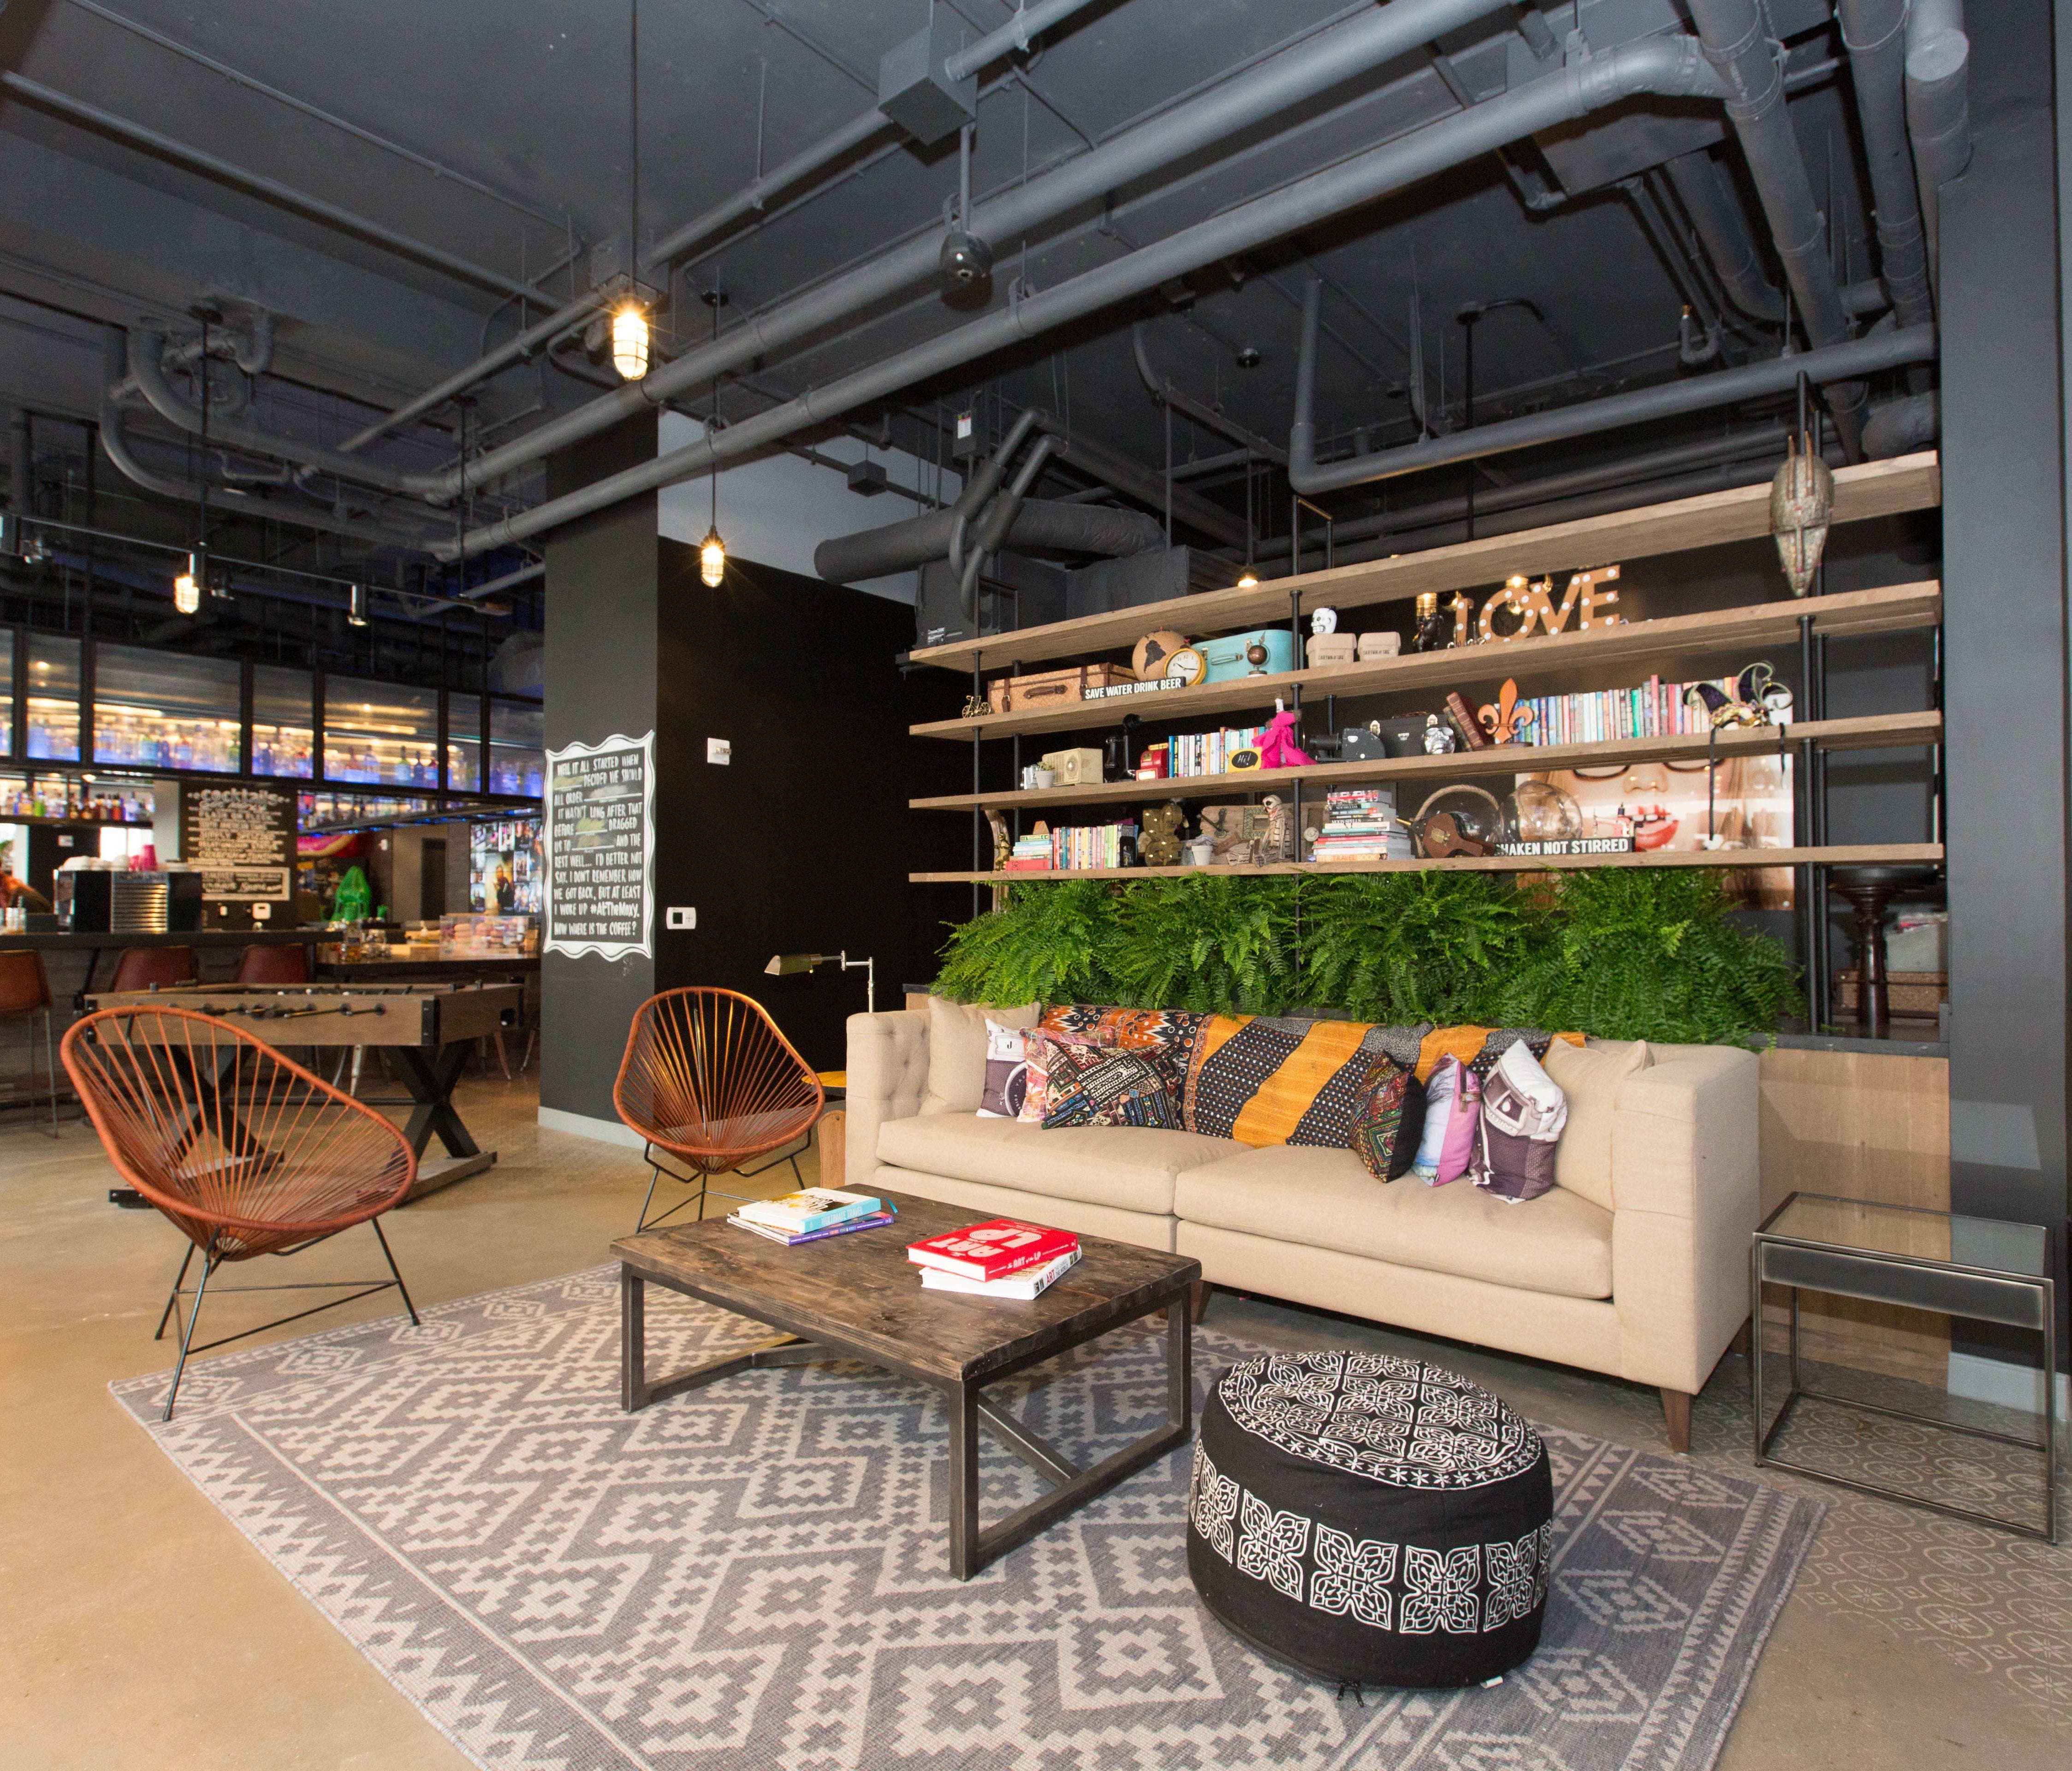 Ikea: Moxy, a hotel brand born from a collaboration between Ikea and Marriott Hotels, focuses on millennials. How? It marries trendy boutique amenities and stylish accents with an affordable price point. That said, guests can expect keyless entry, mo